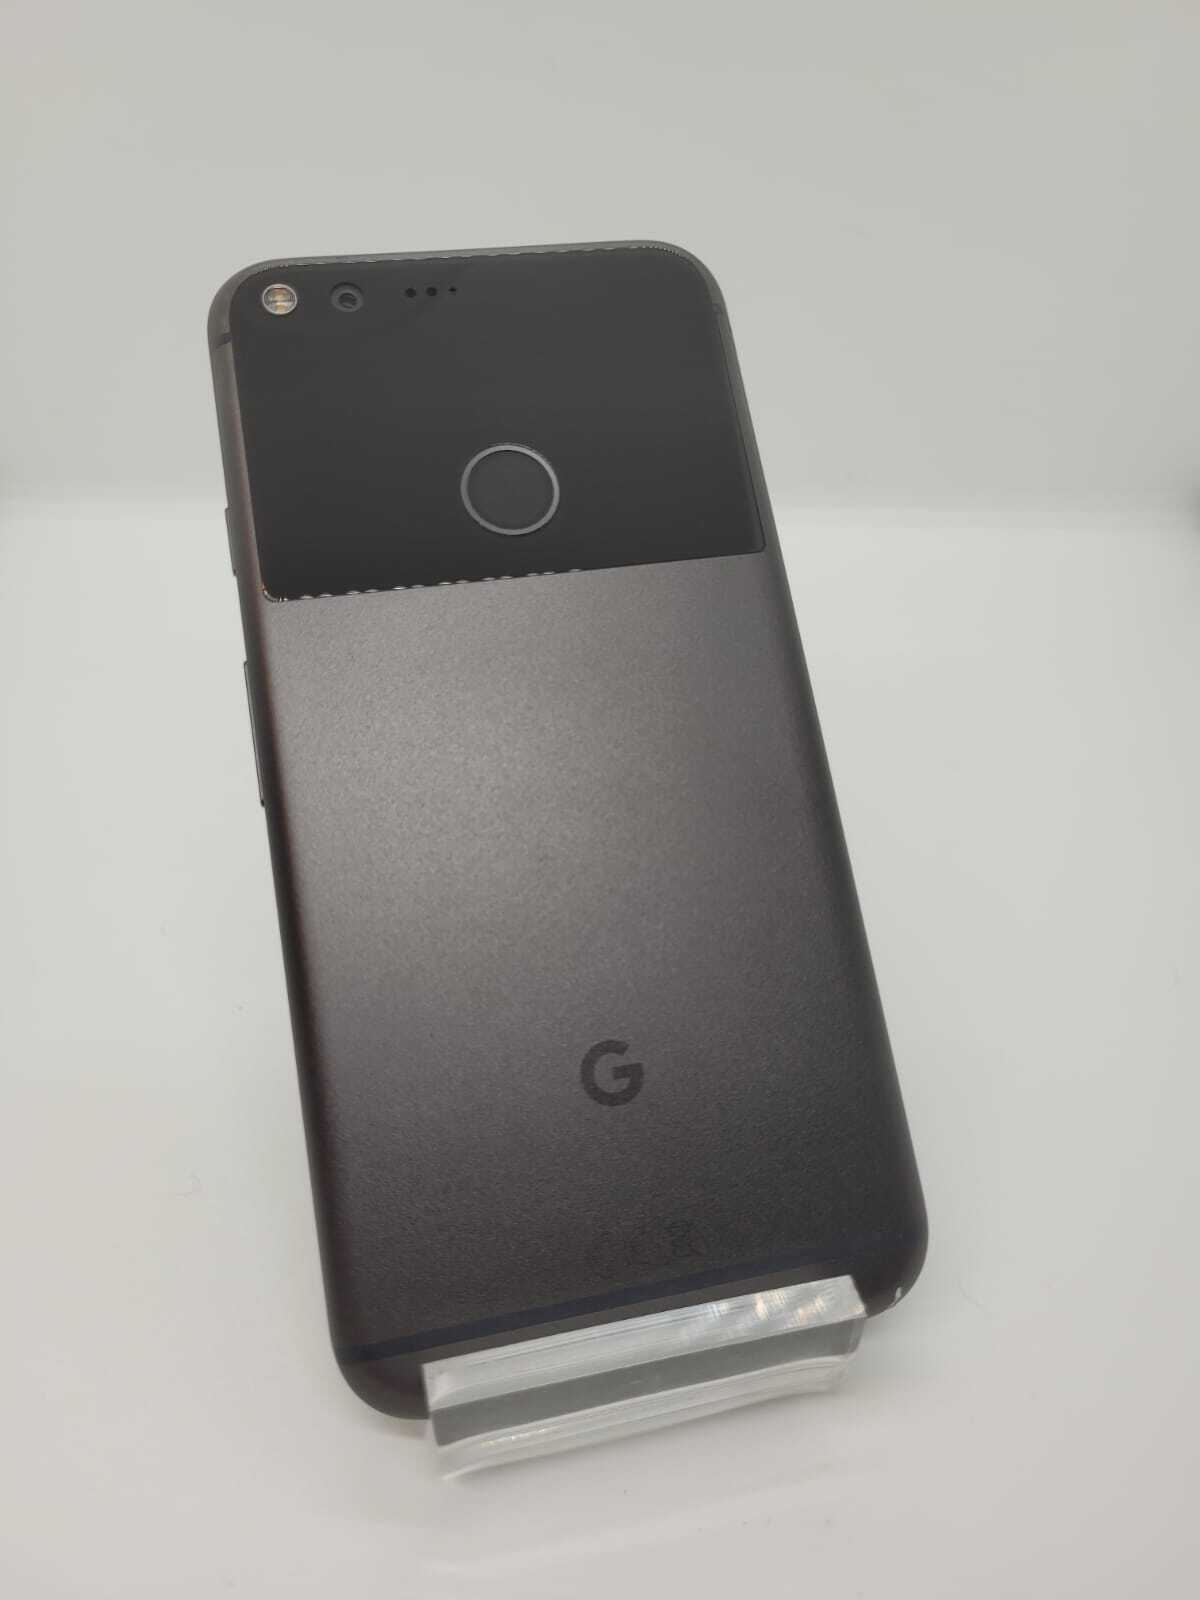 Google Pixel XL 32GB Unlocked Android 4G LTE Smartphone 2PW2100